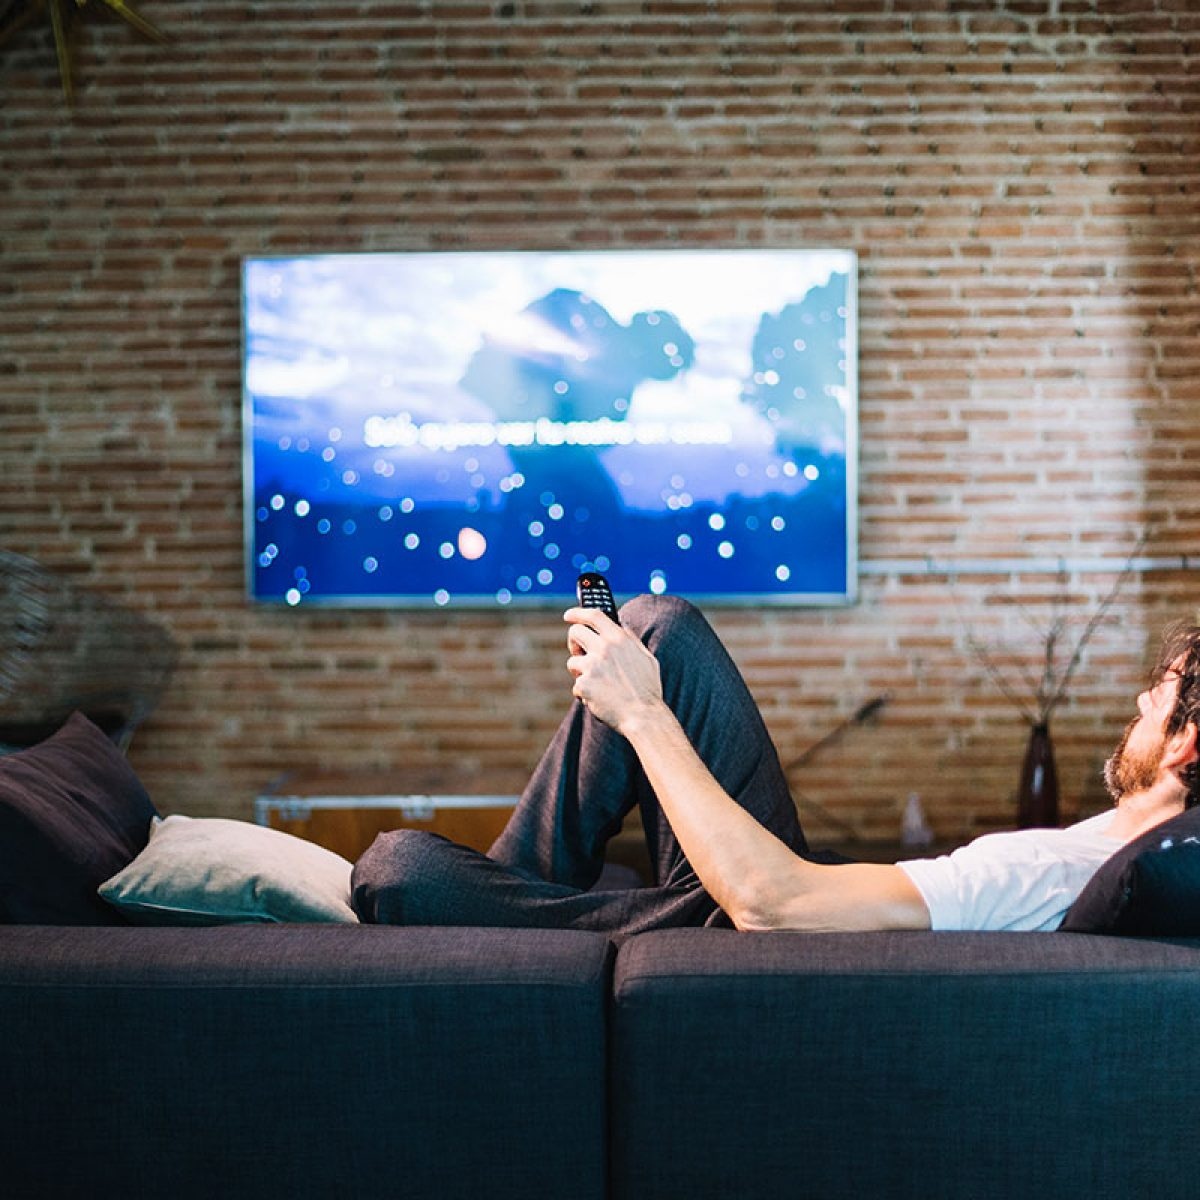 How Far Should You Sit From A 75-Inch QLED TV